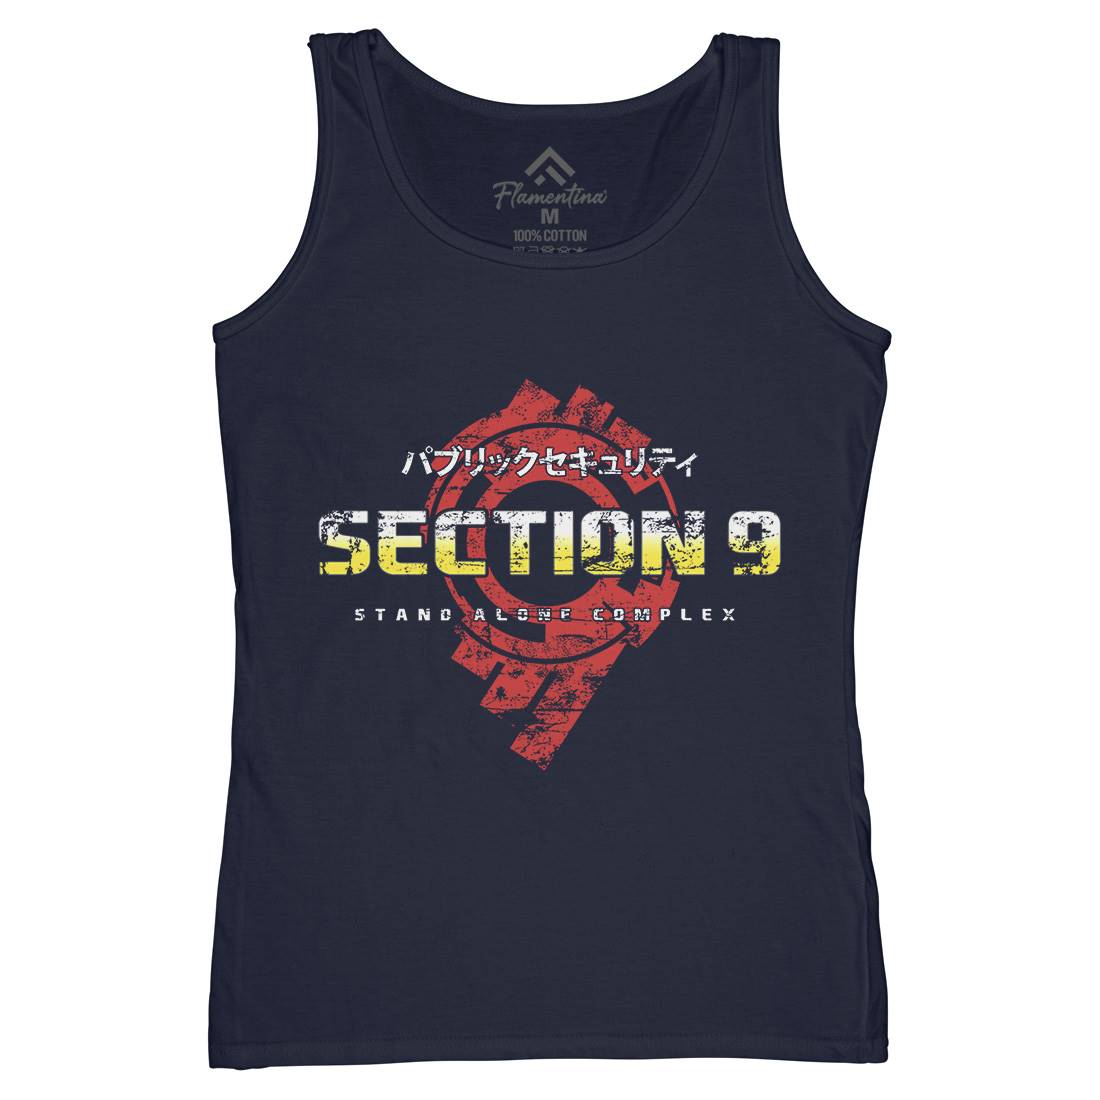 Section 9 Womens Organic Tank Top Vest Space D193